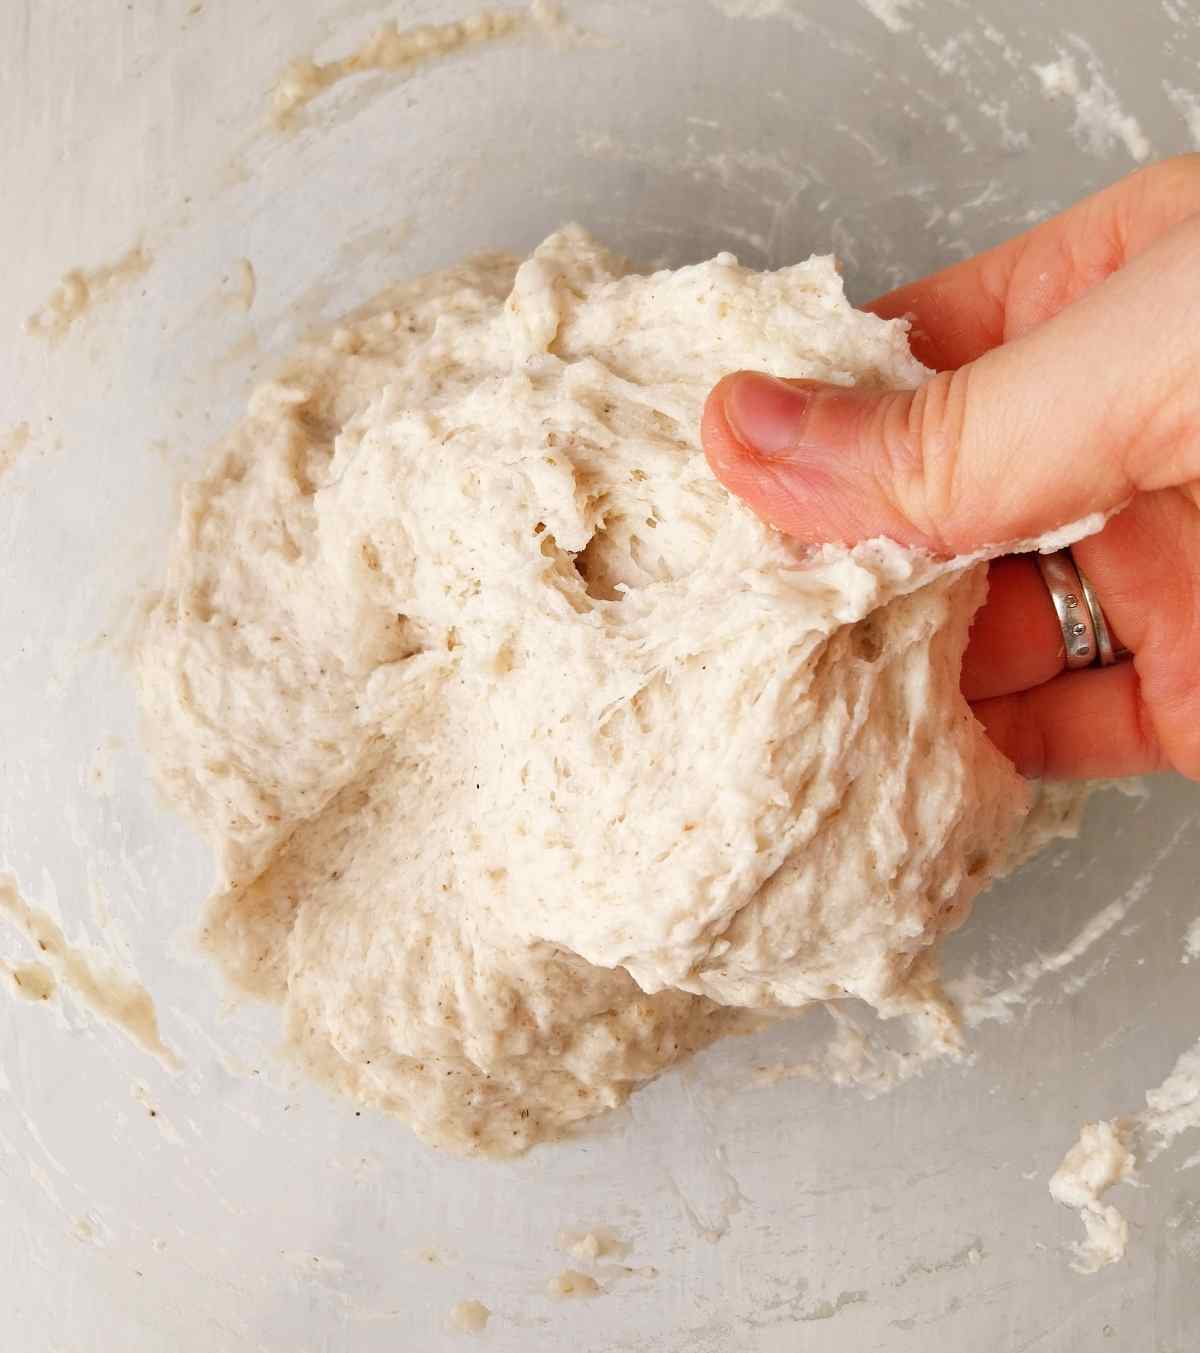 Stretchy dough in a large mixing bowl with a hand pulling it to the side.